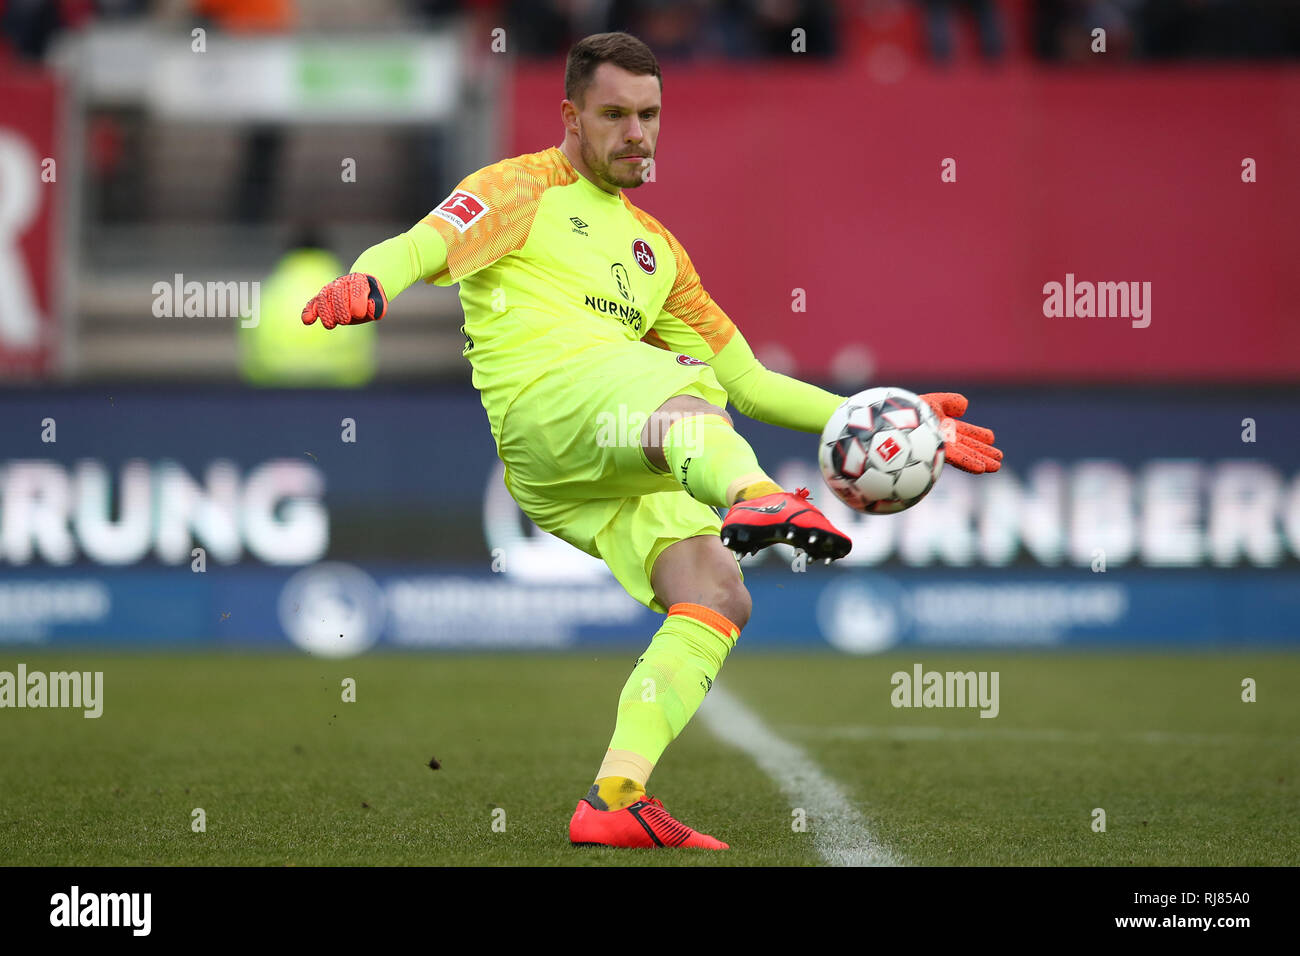 02 February 2019, Bavaria, Nürnberg: Soccer: Bundesliga, 1st FC Nuremberg - Werder Bremen, 20th matchday in Max Morlock Stadium. Nuremberg goalkeeper Christian Mathenia plays the ball. Photo: Daniel Karmann/dpa - IMPORTANT NOTE: In accordance with the requirements of the DFL Deutsche Fußball Liga or the DFB Deutscher Fußball-Bund, it is prohibited to use or have used photographs taken in the stadium and/or the match in the form of sequence images and/or video-like photo sequences. Stock Photo